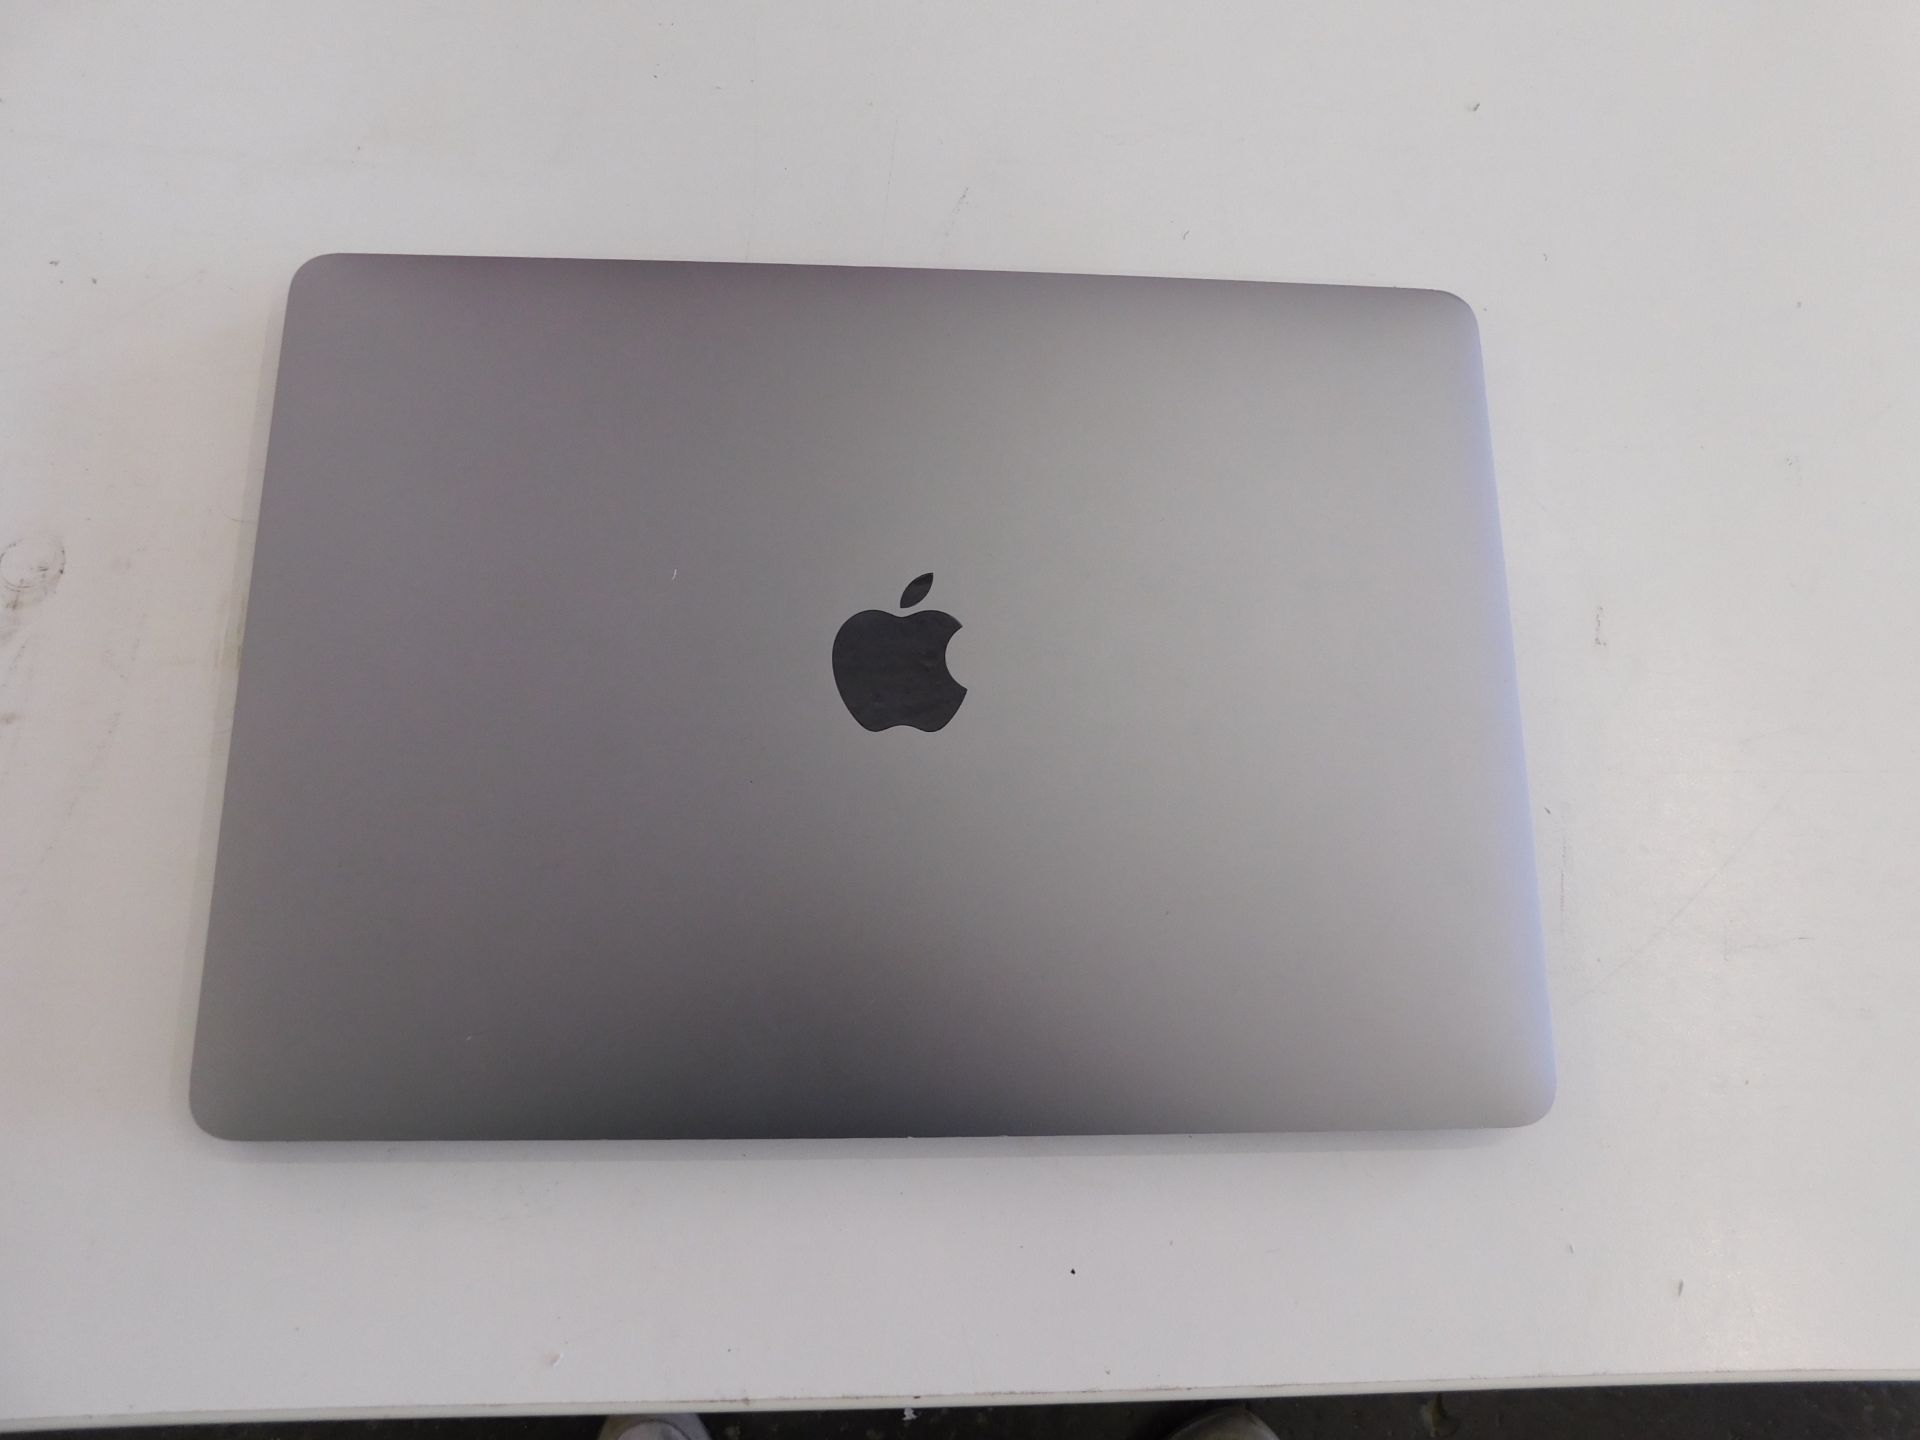 Apple MacBook Pro, A2159, Serial Number C02ZC1E7L410, i5 @1.4 GHz, 8GB RAM, 251GB SSD, OS Installed, - Image 4 of 5